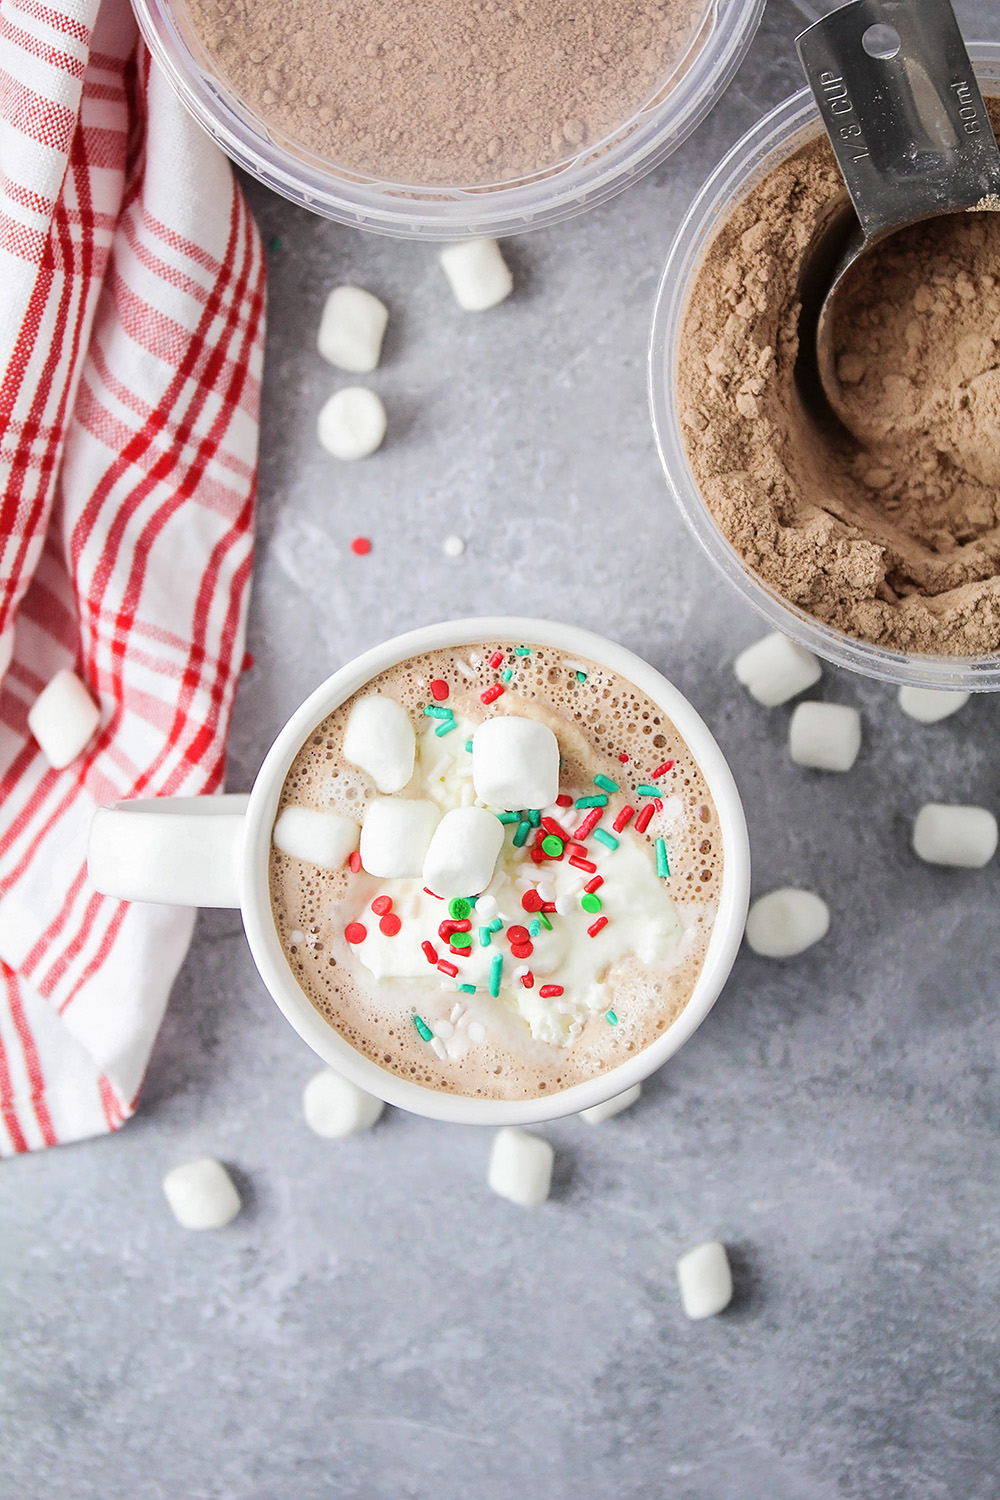 This homemade hot chocolate mix is so easy to make, and makes the absolute best cocoa!